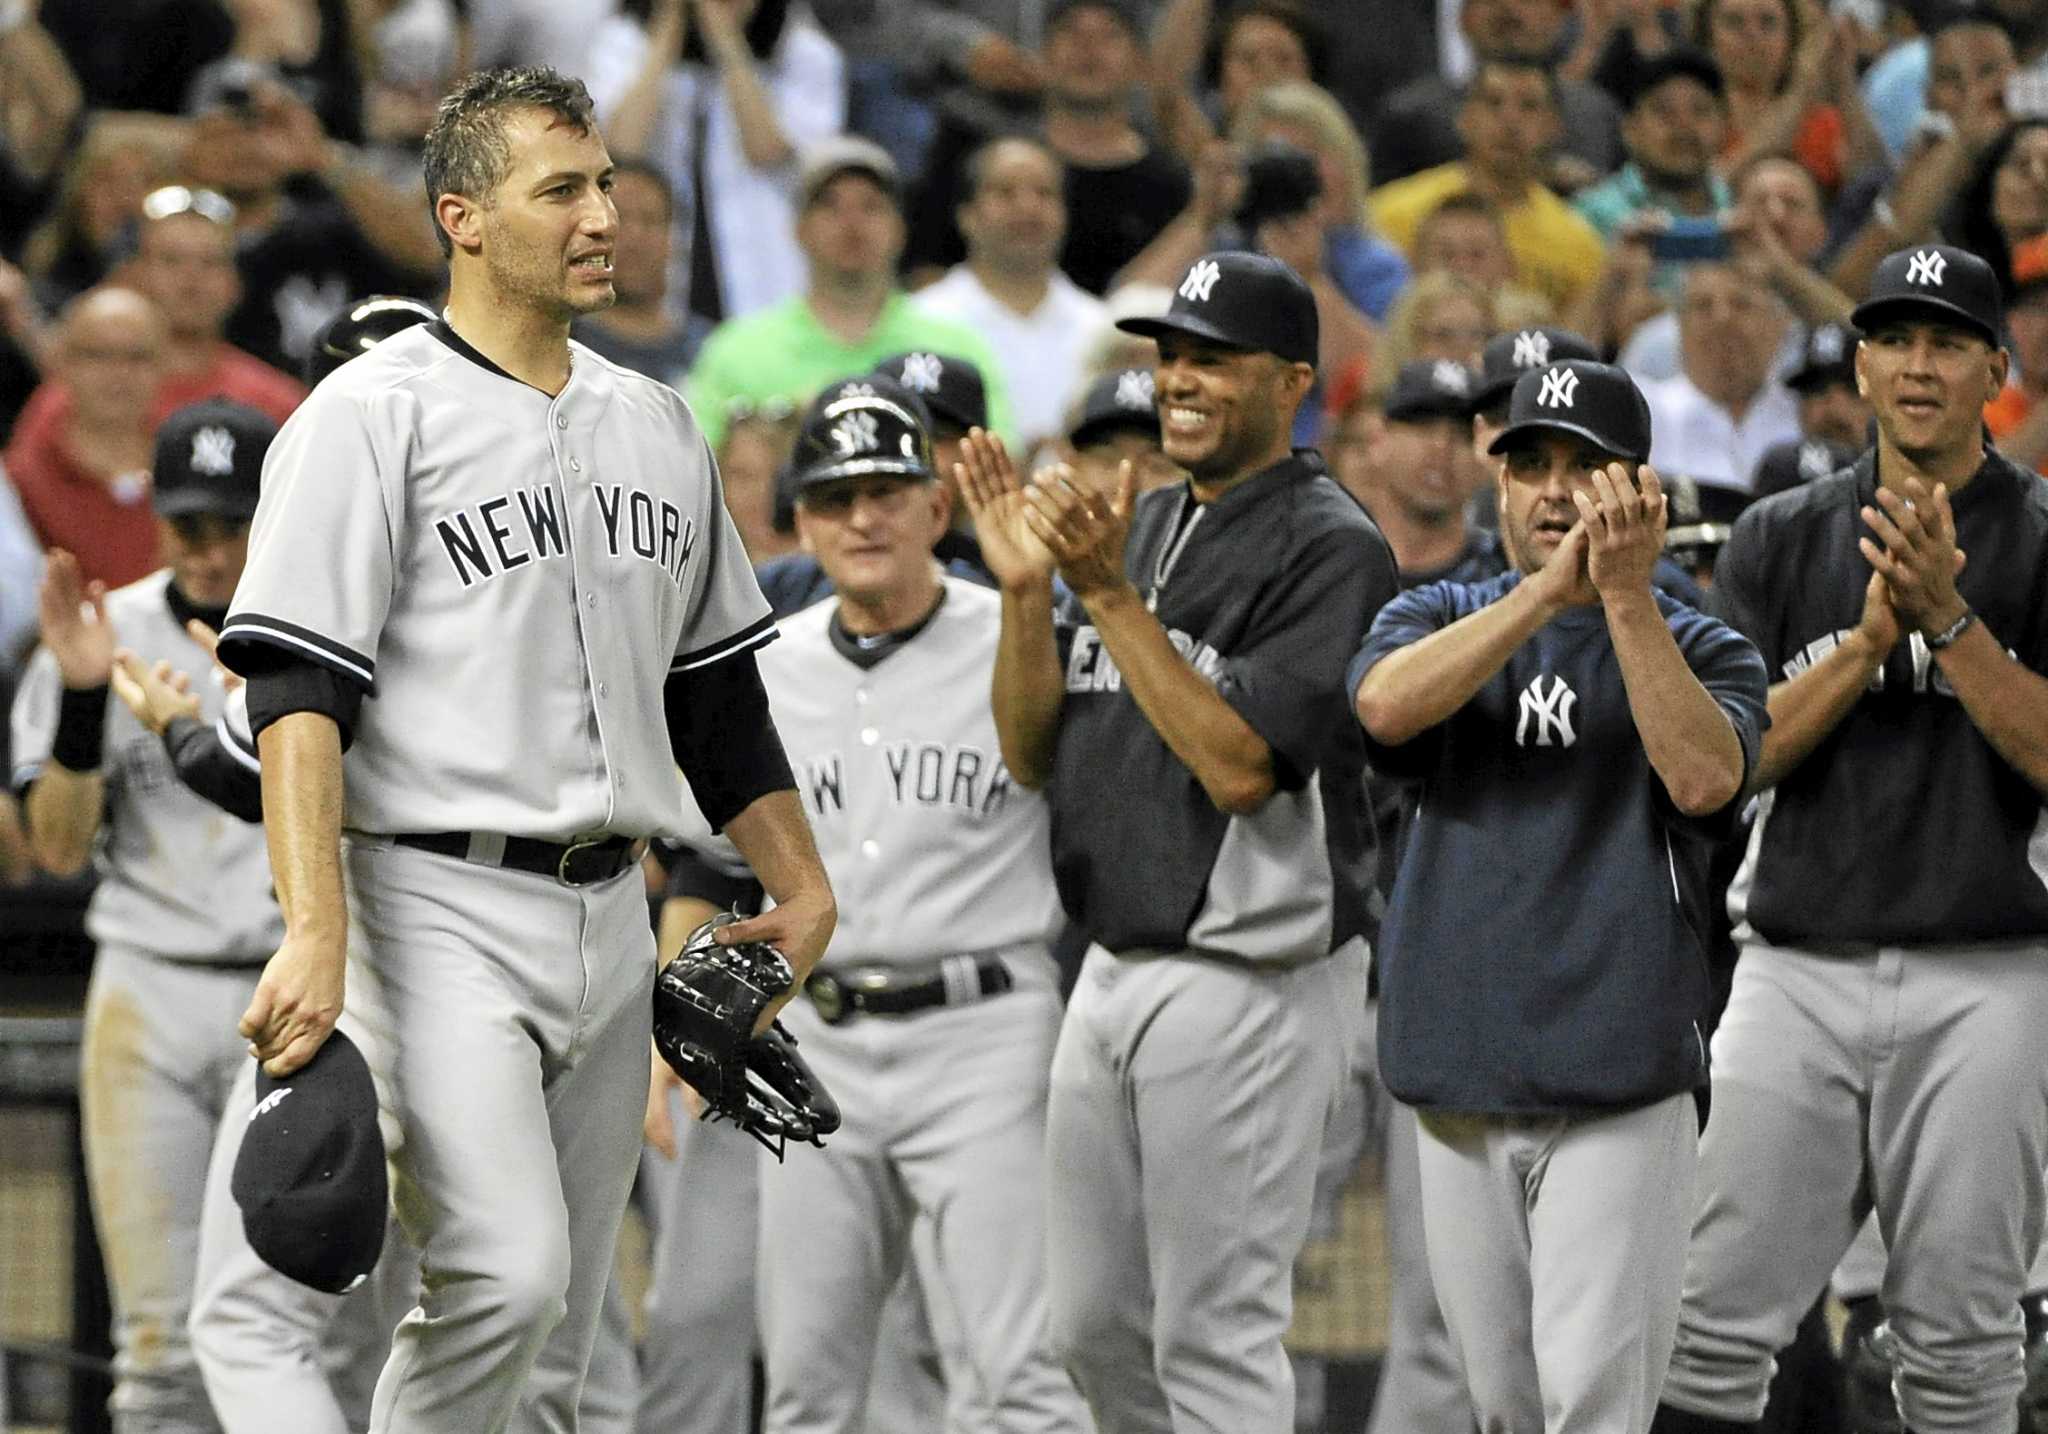 Andy Pettitte throws complete game in final career start 